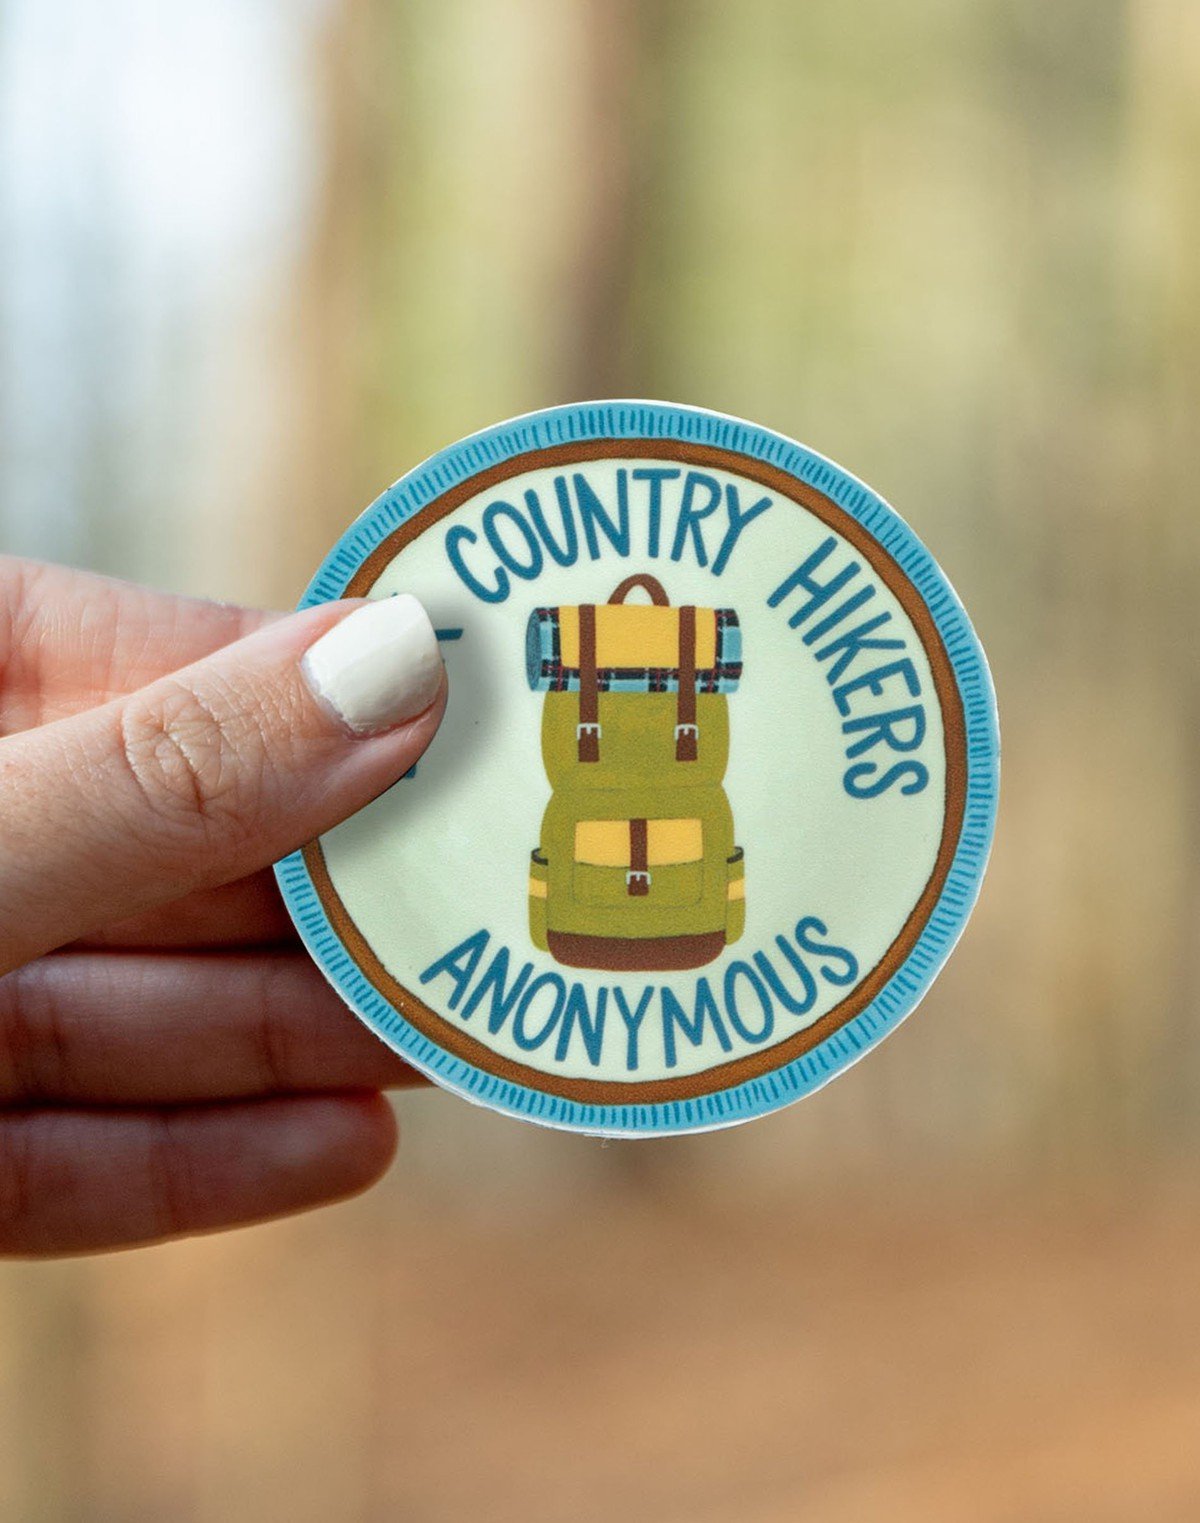 Back Country Hikers Decal item